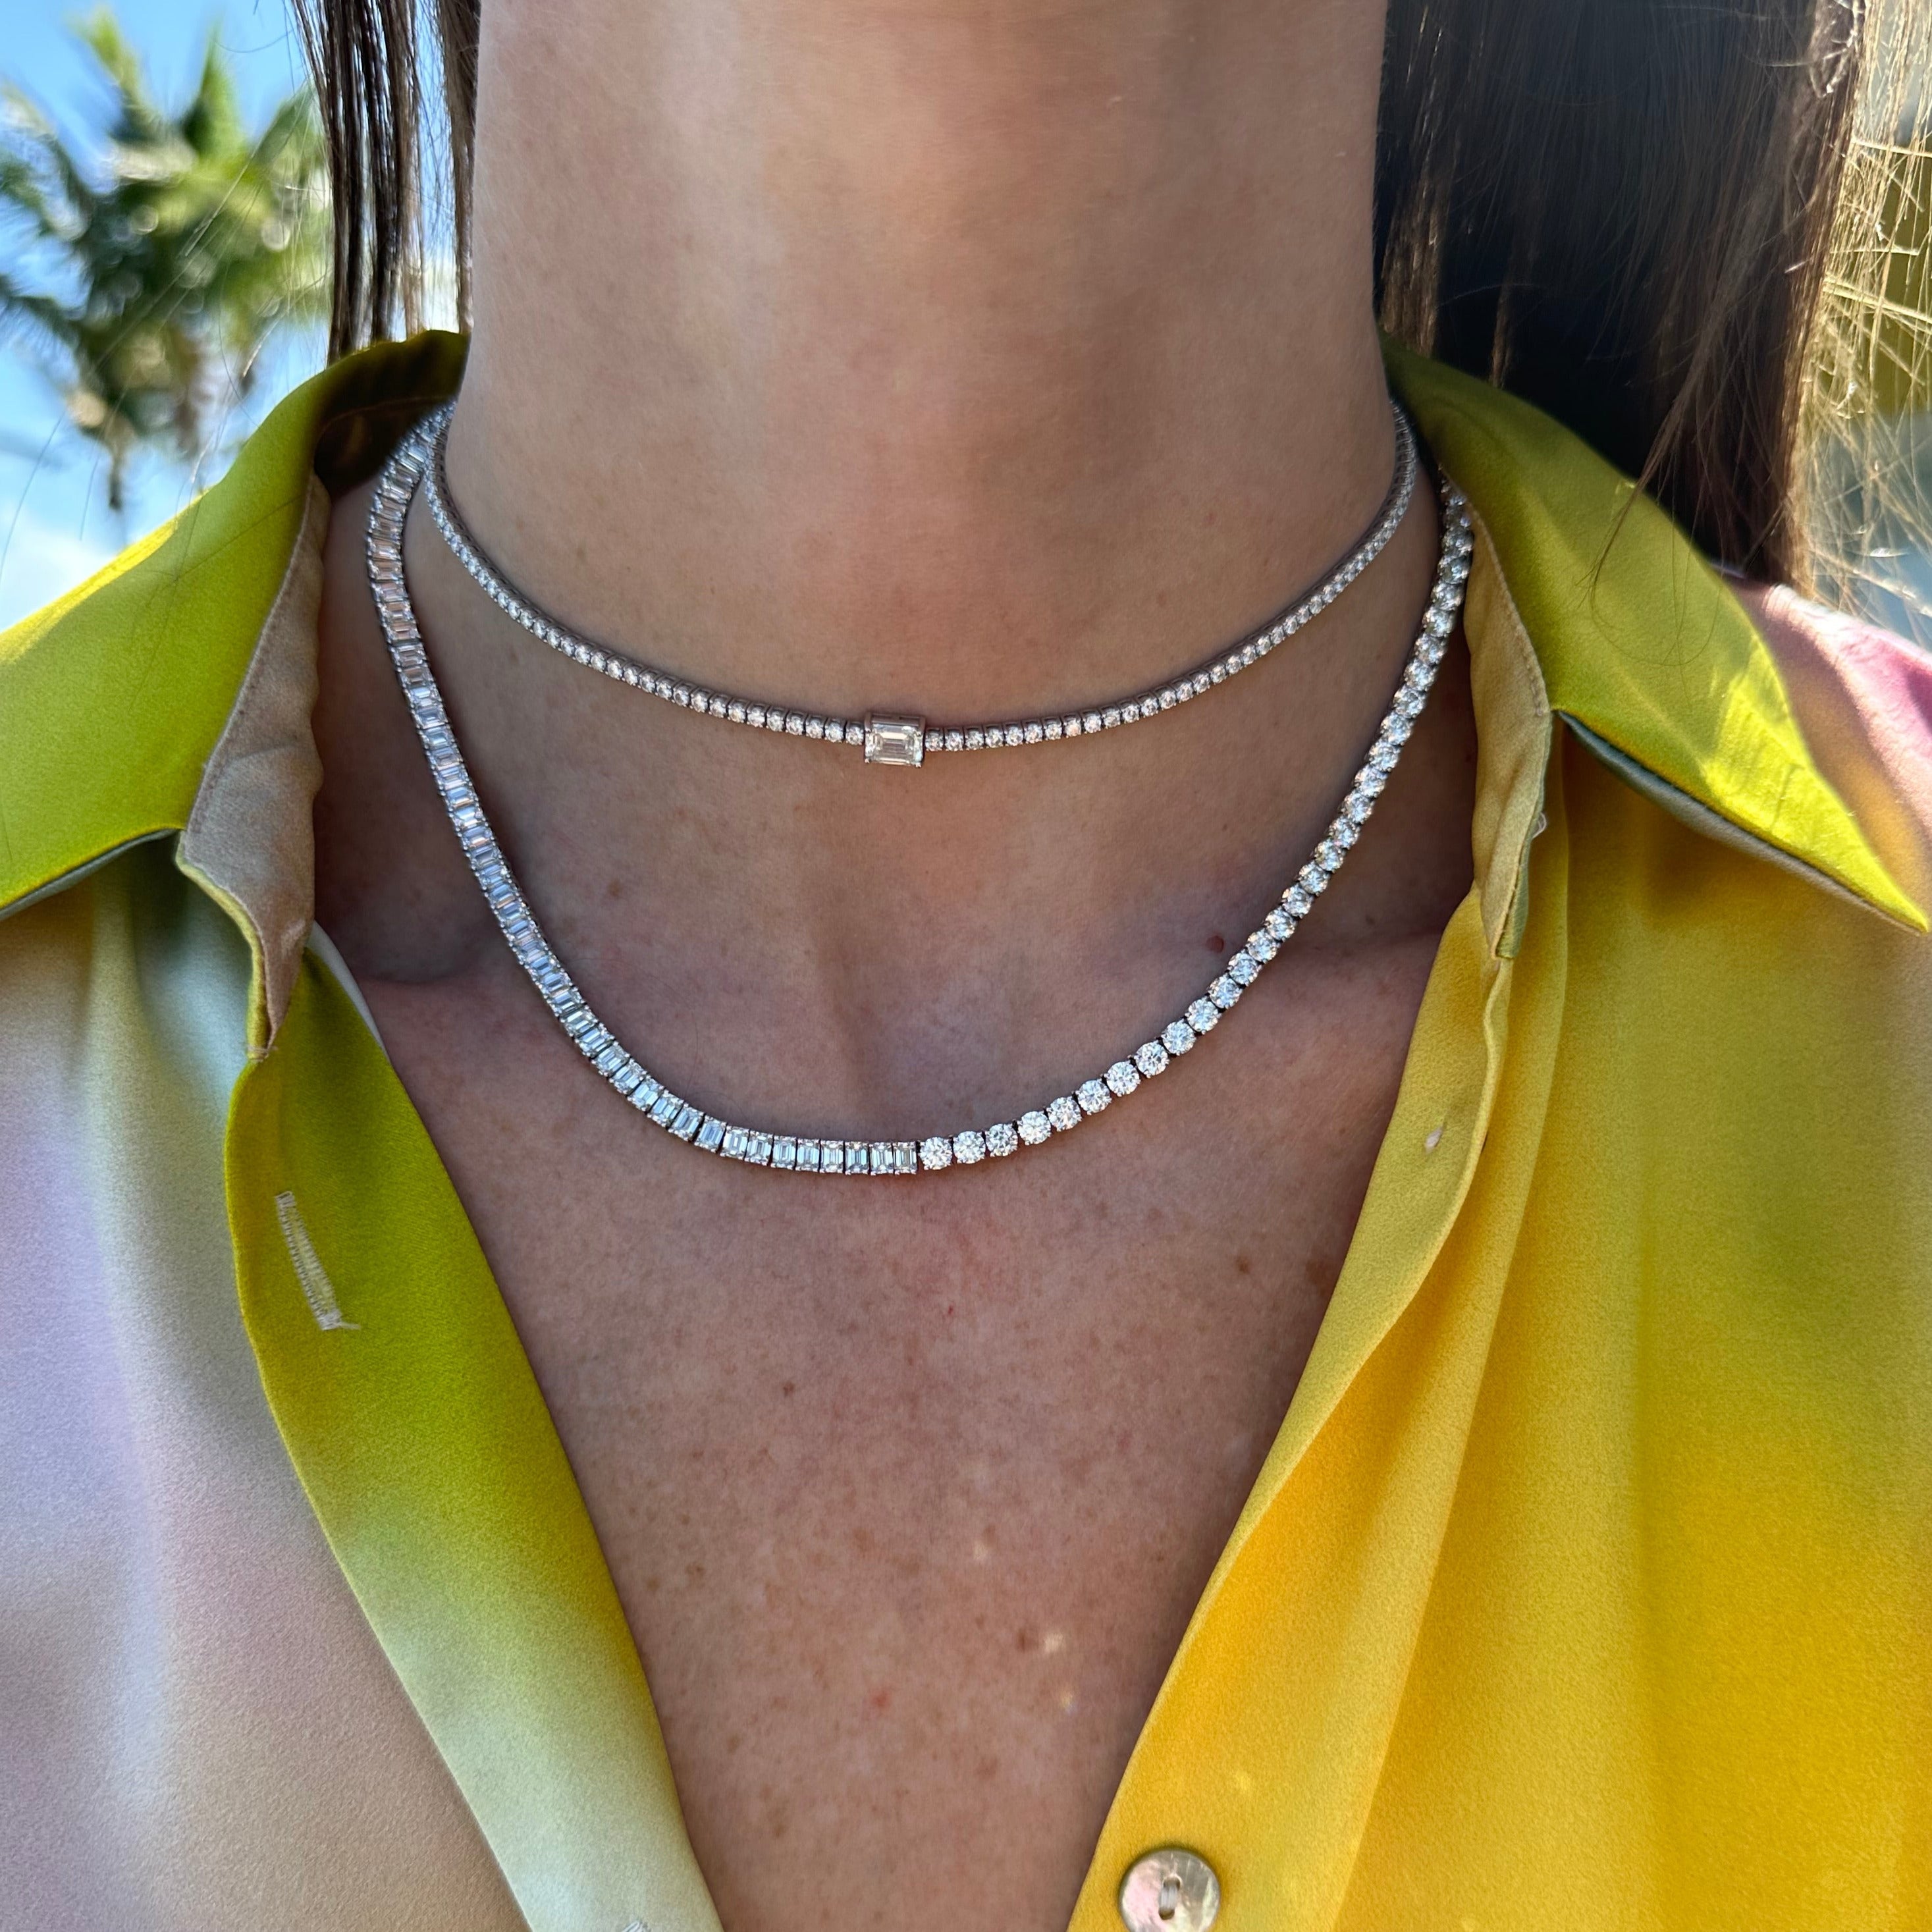 The Undecided® Tennis Necklace